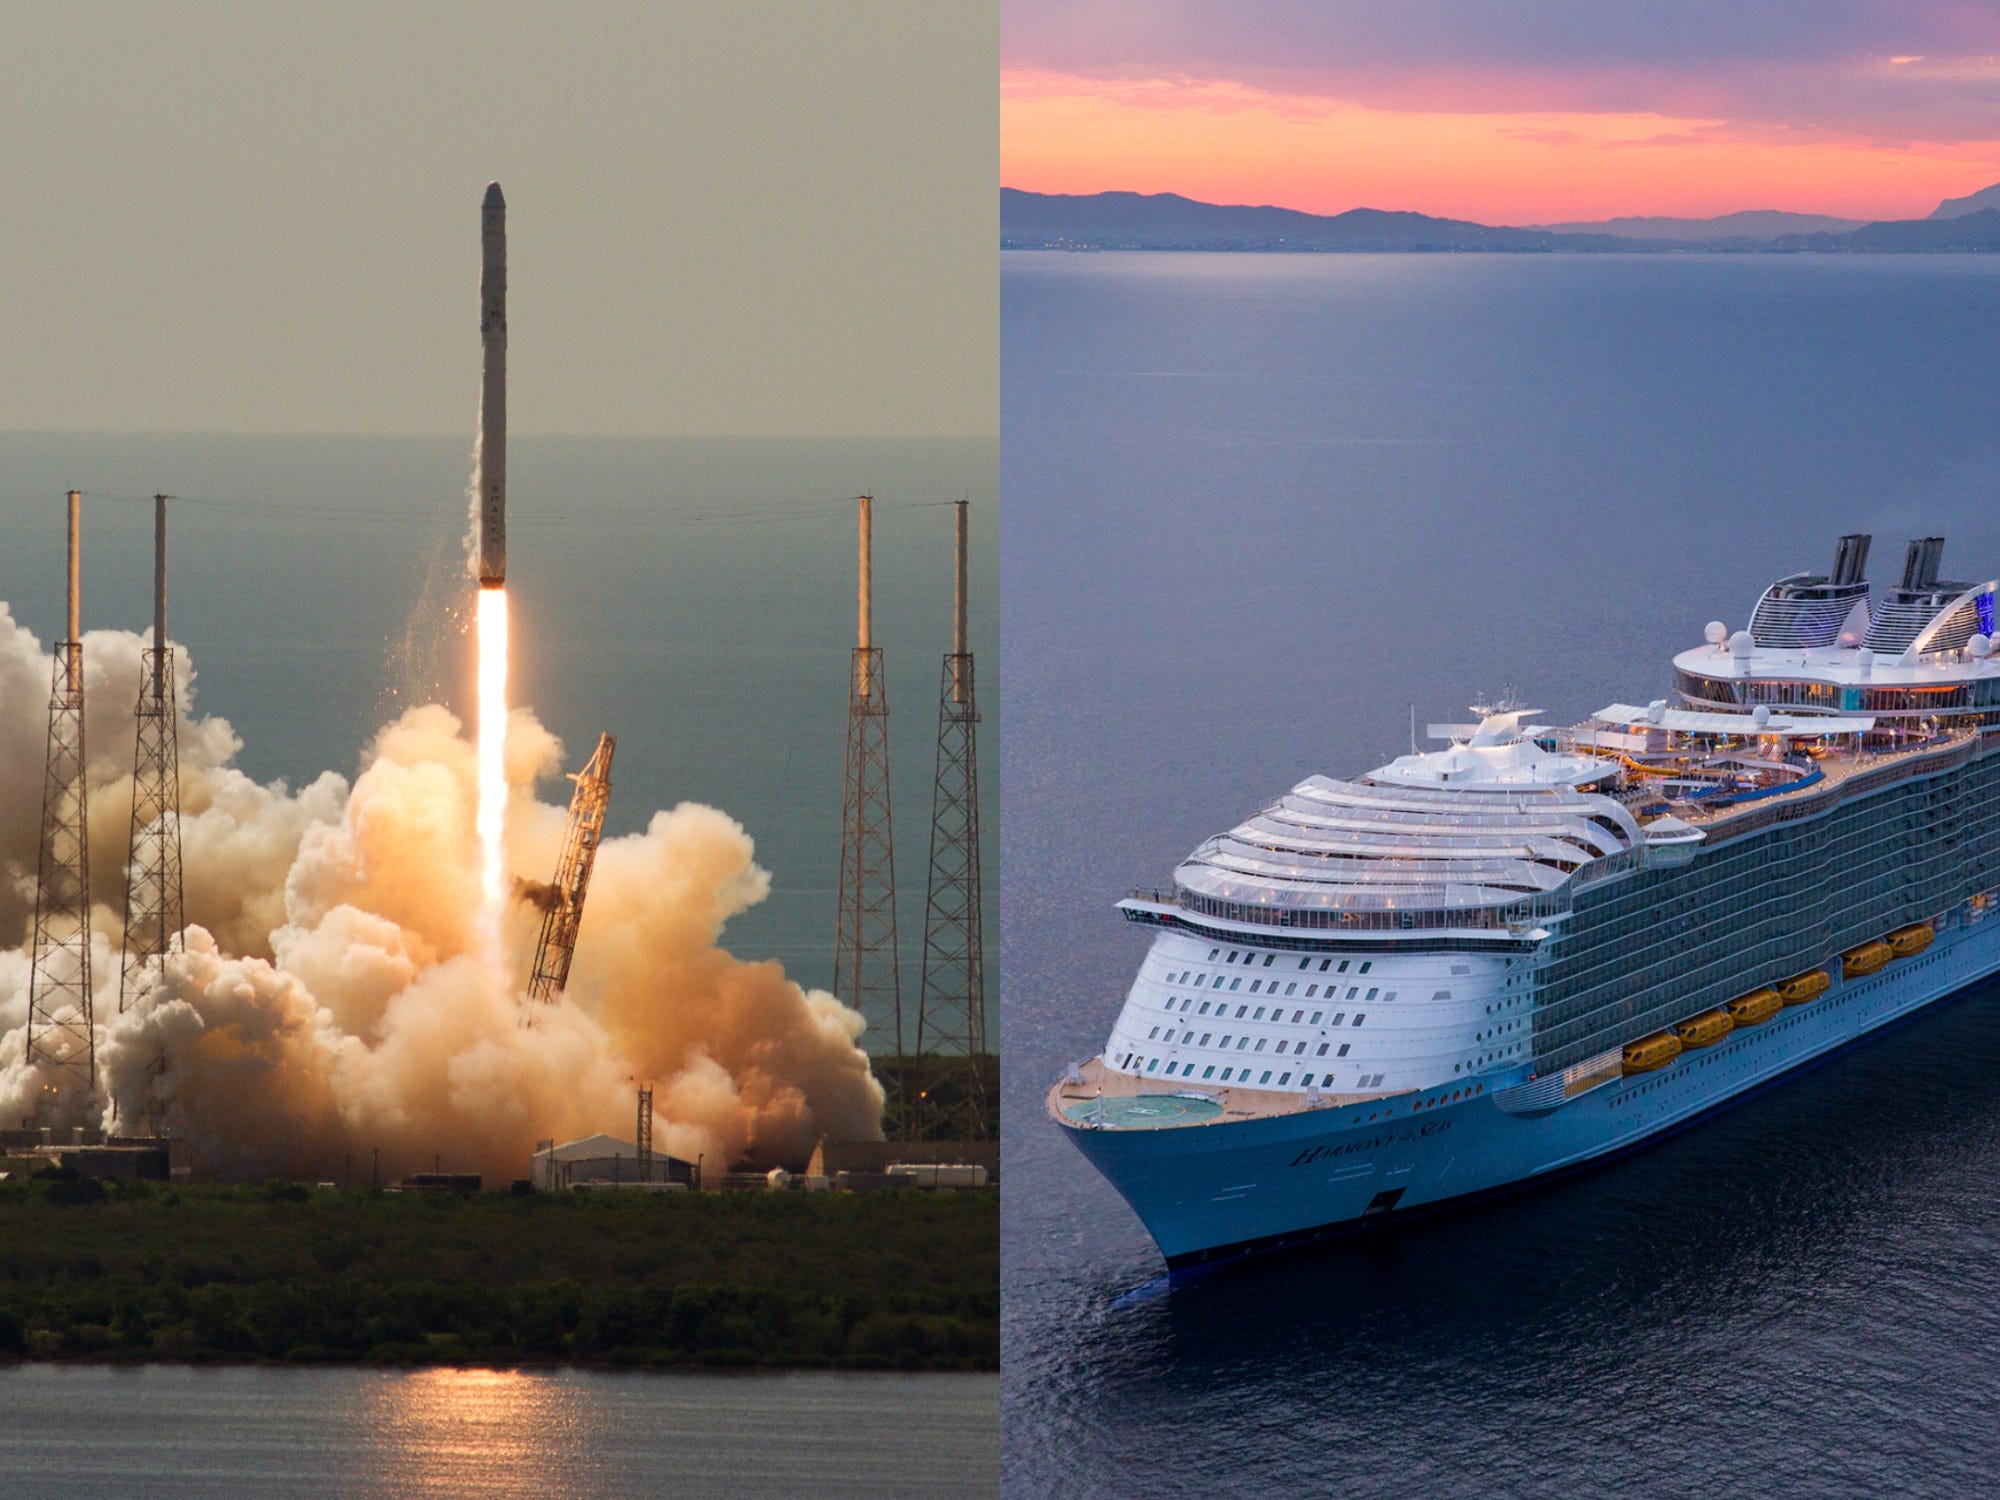 SpaceX had to abort a rocket launch Sunday after Royal Caribbean's Harmony of the Seas cruise liner got too close to the hazard area, US Coast Guard told Florida Today.